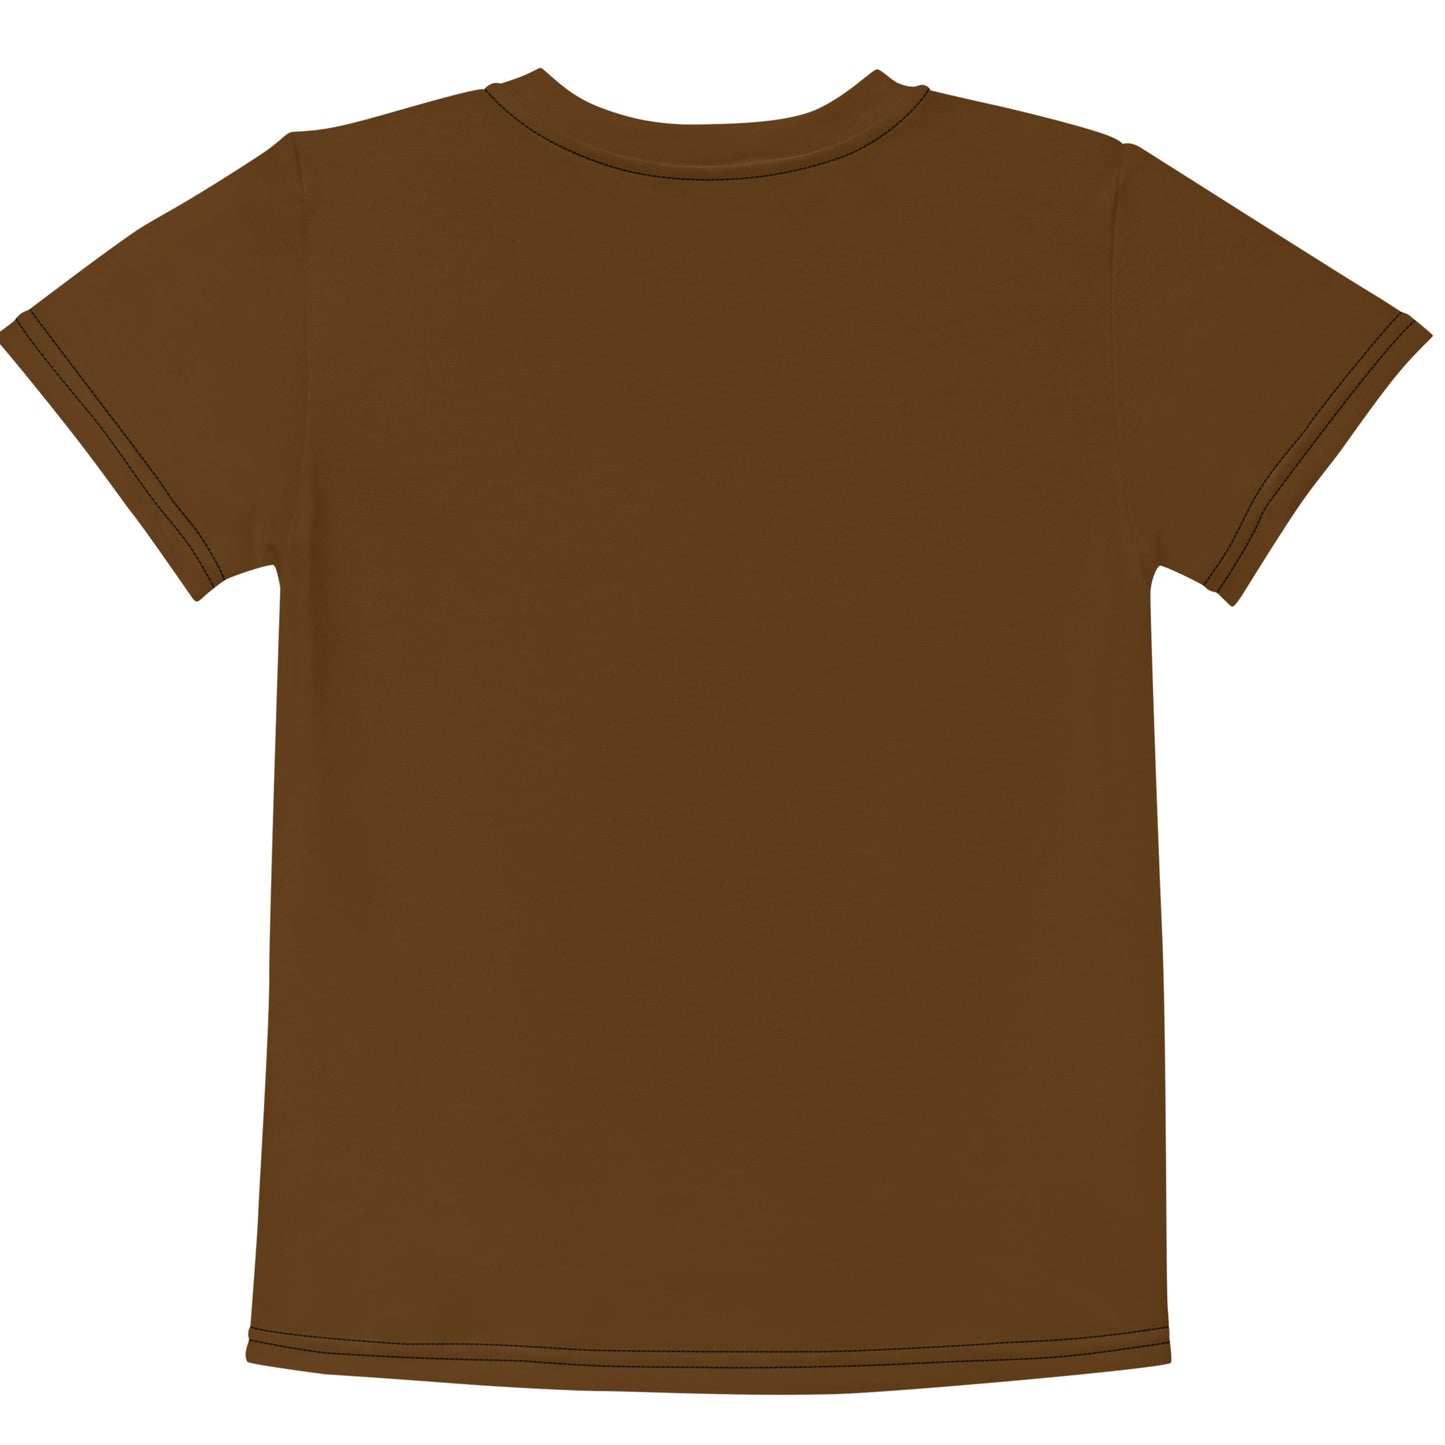 Retro Block - Inspired By Harry Styles - Sustainably Made Kids t-shirt